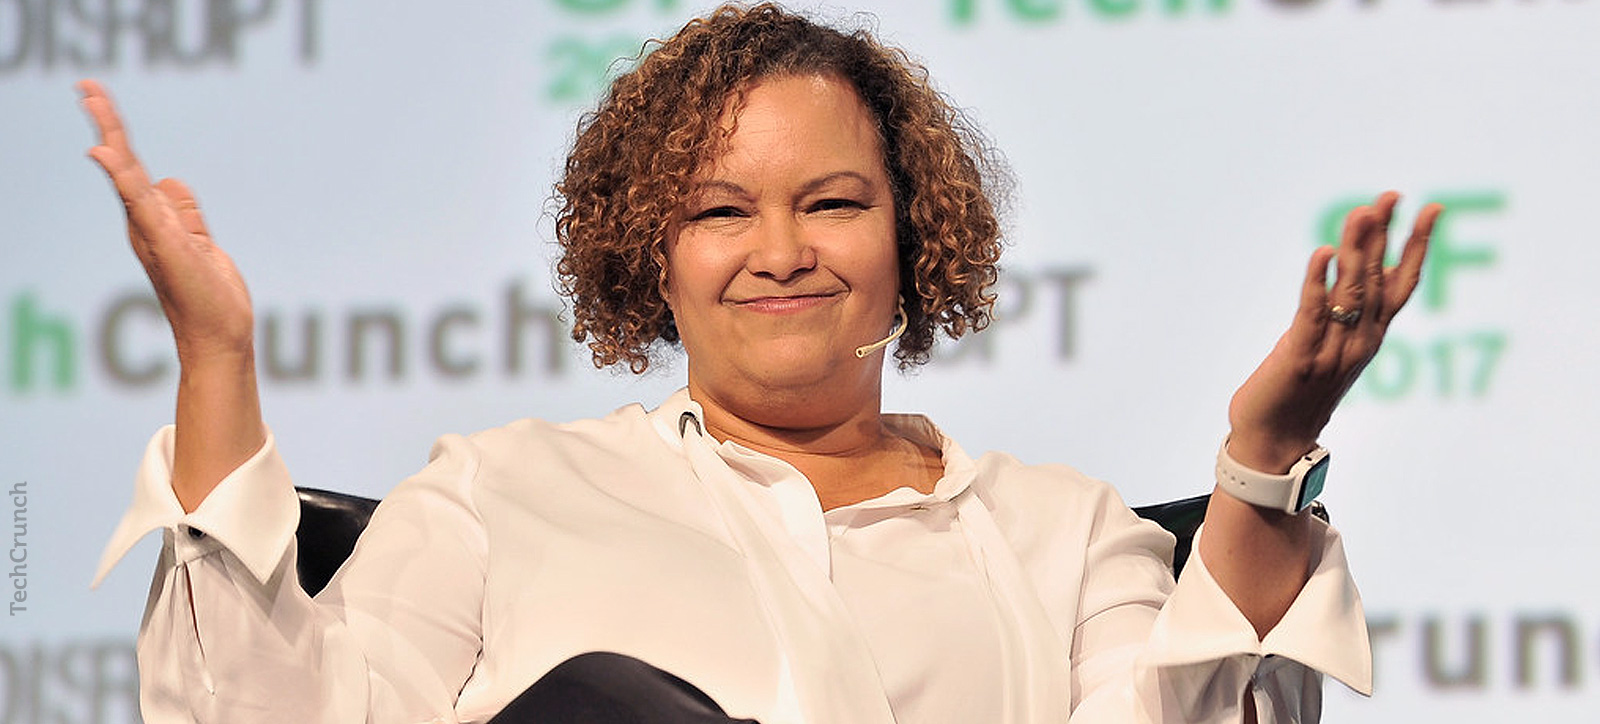 Lisa Jackson (pictured) embraced both business success and sustainability when she joined Apple as vice president of environmental initiatives.